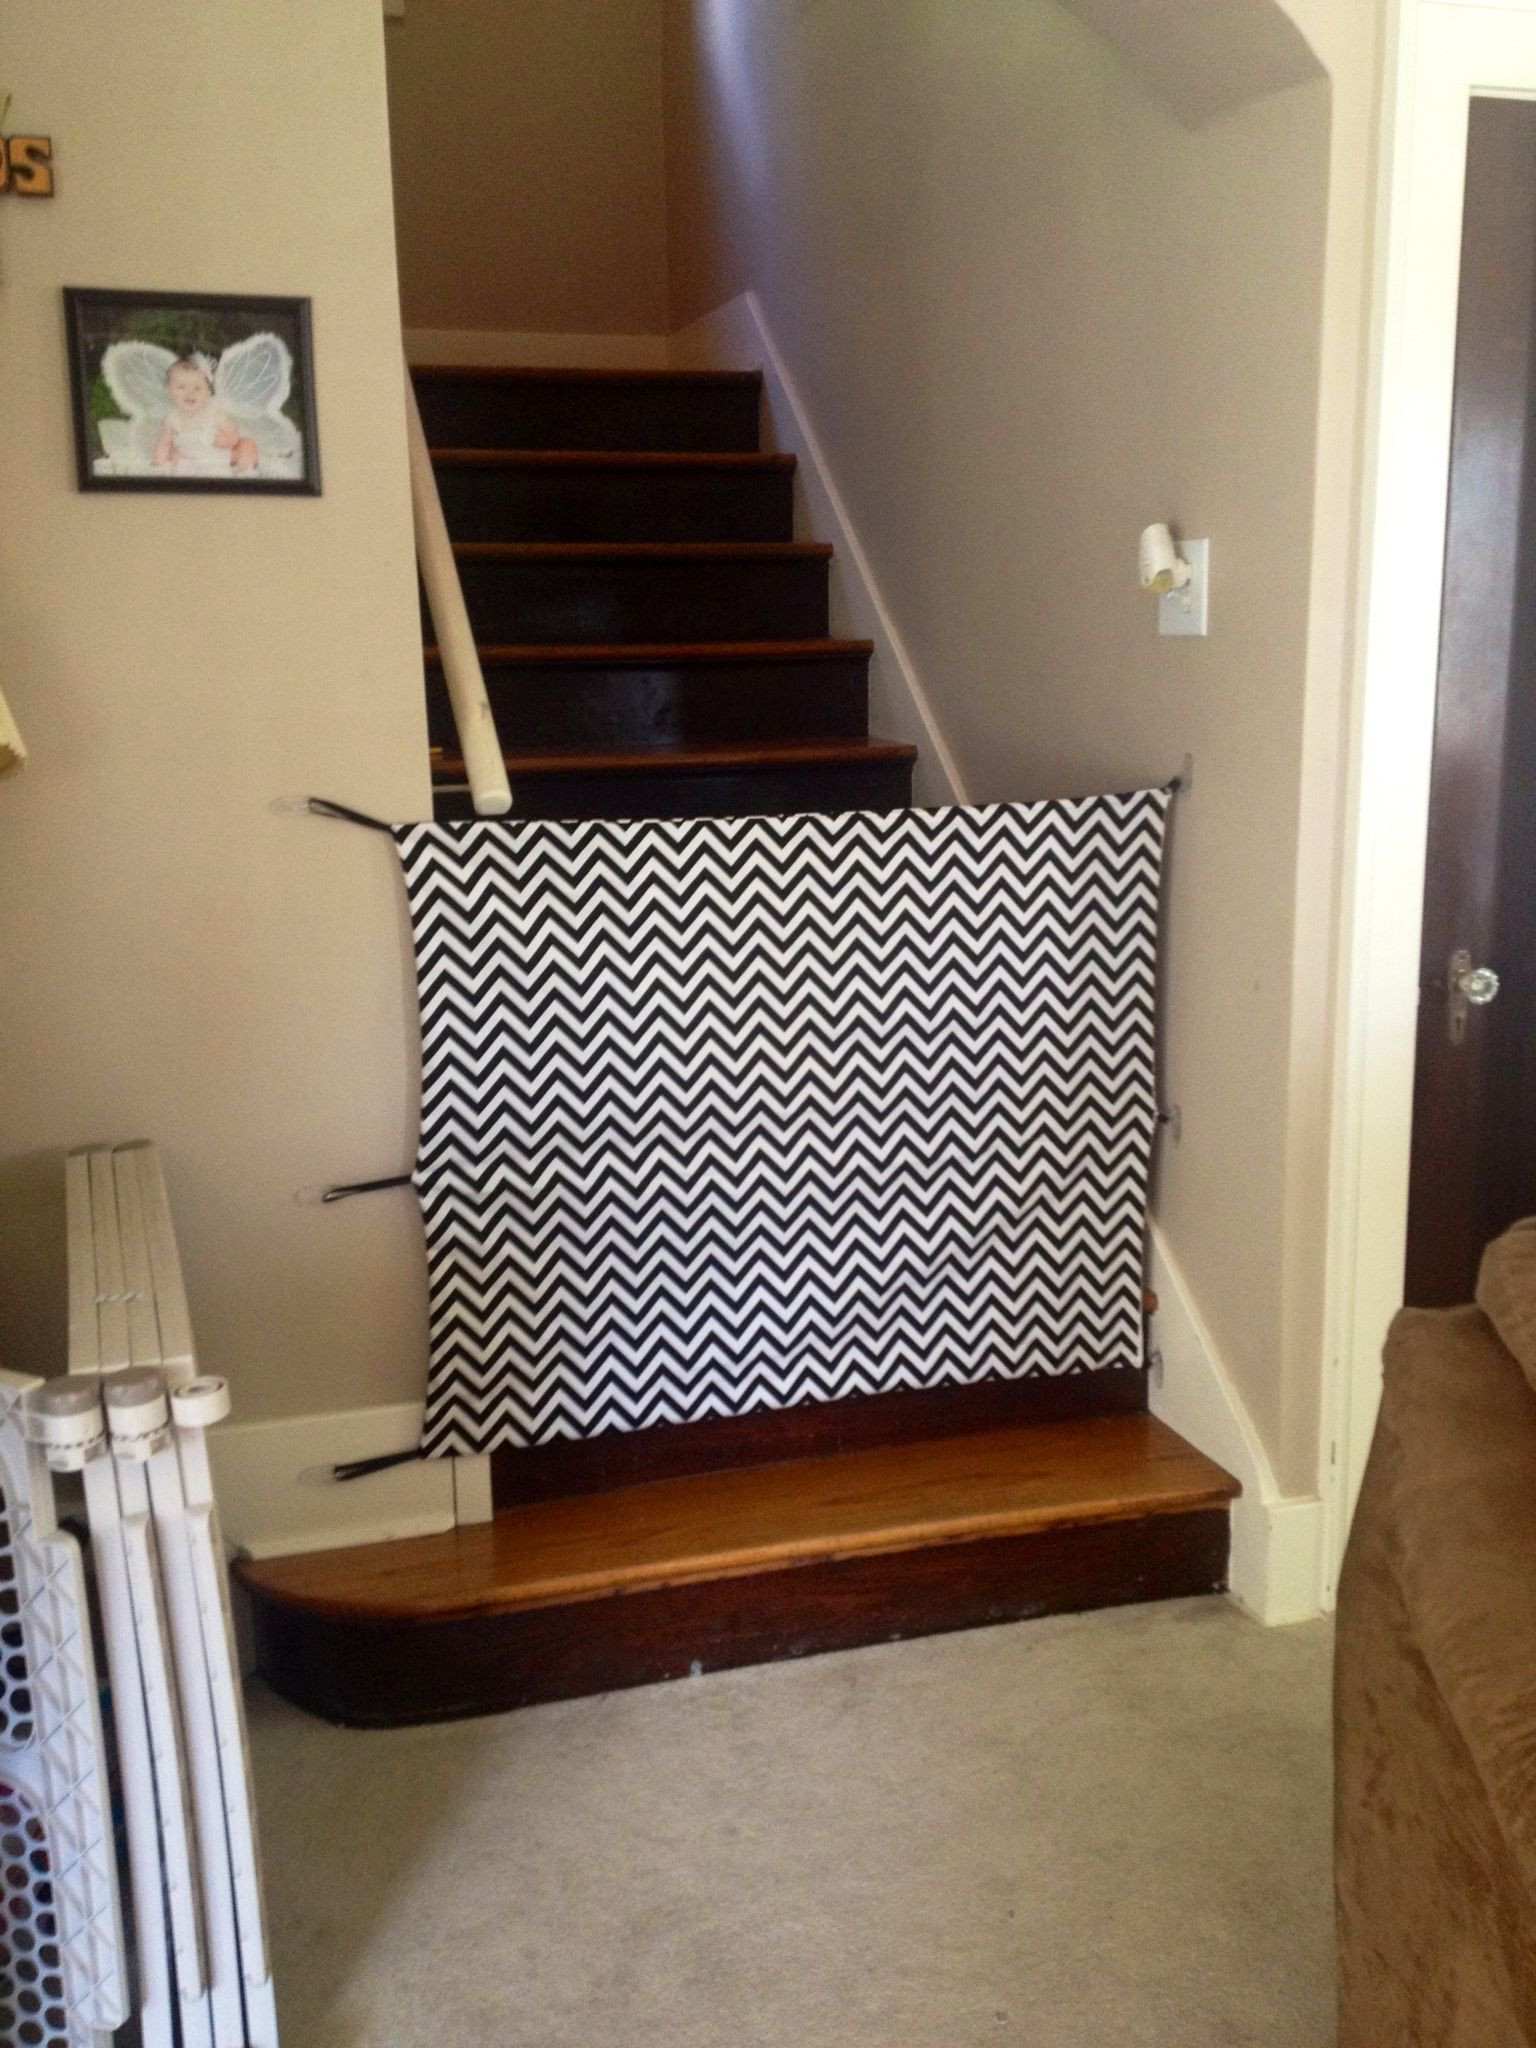 DIY Baby Gate Stairs
 DIY fabric baby gate Cost around $30 total and it looks